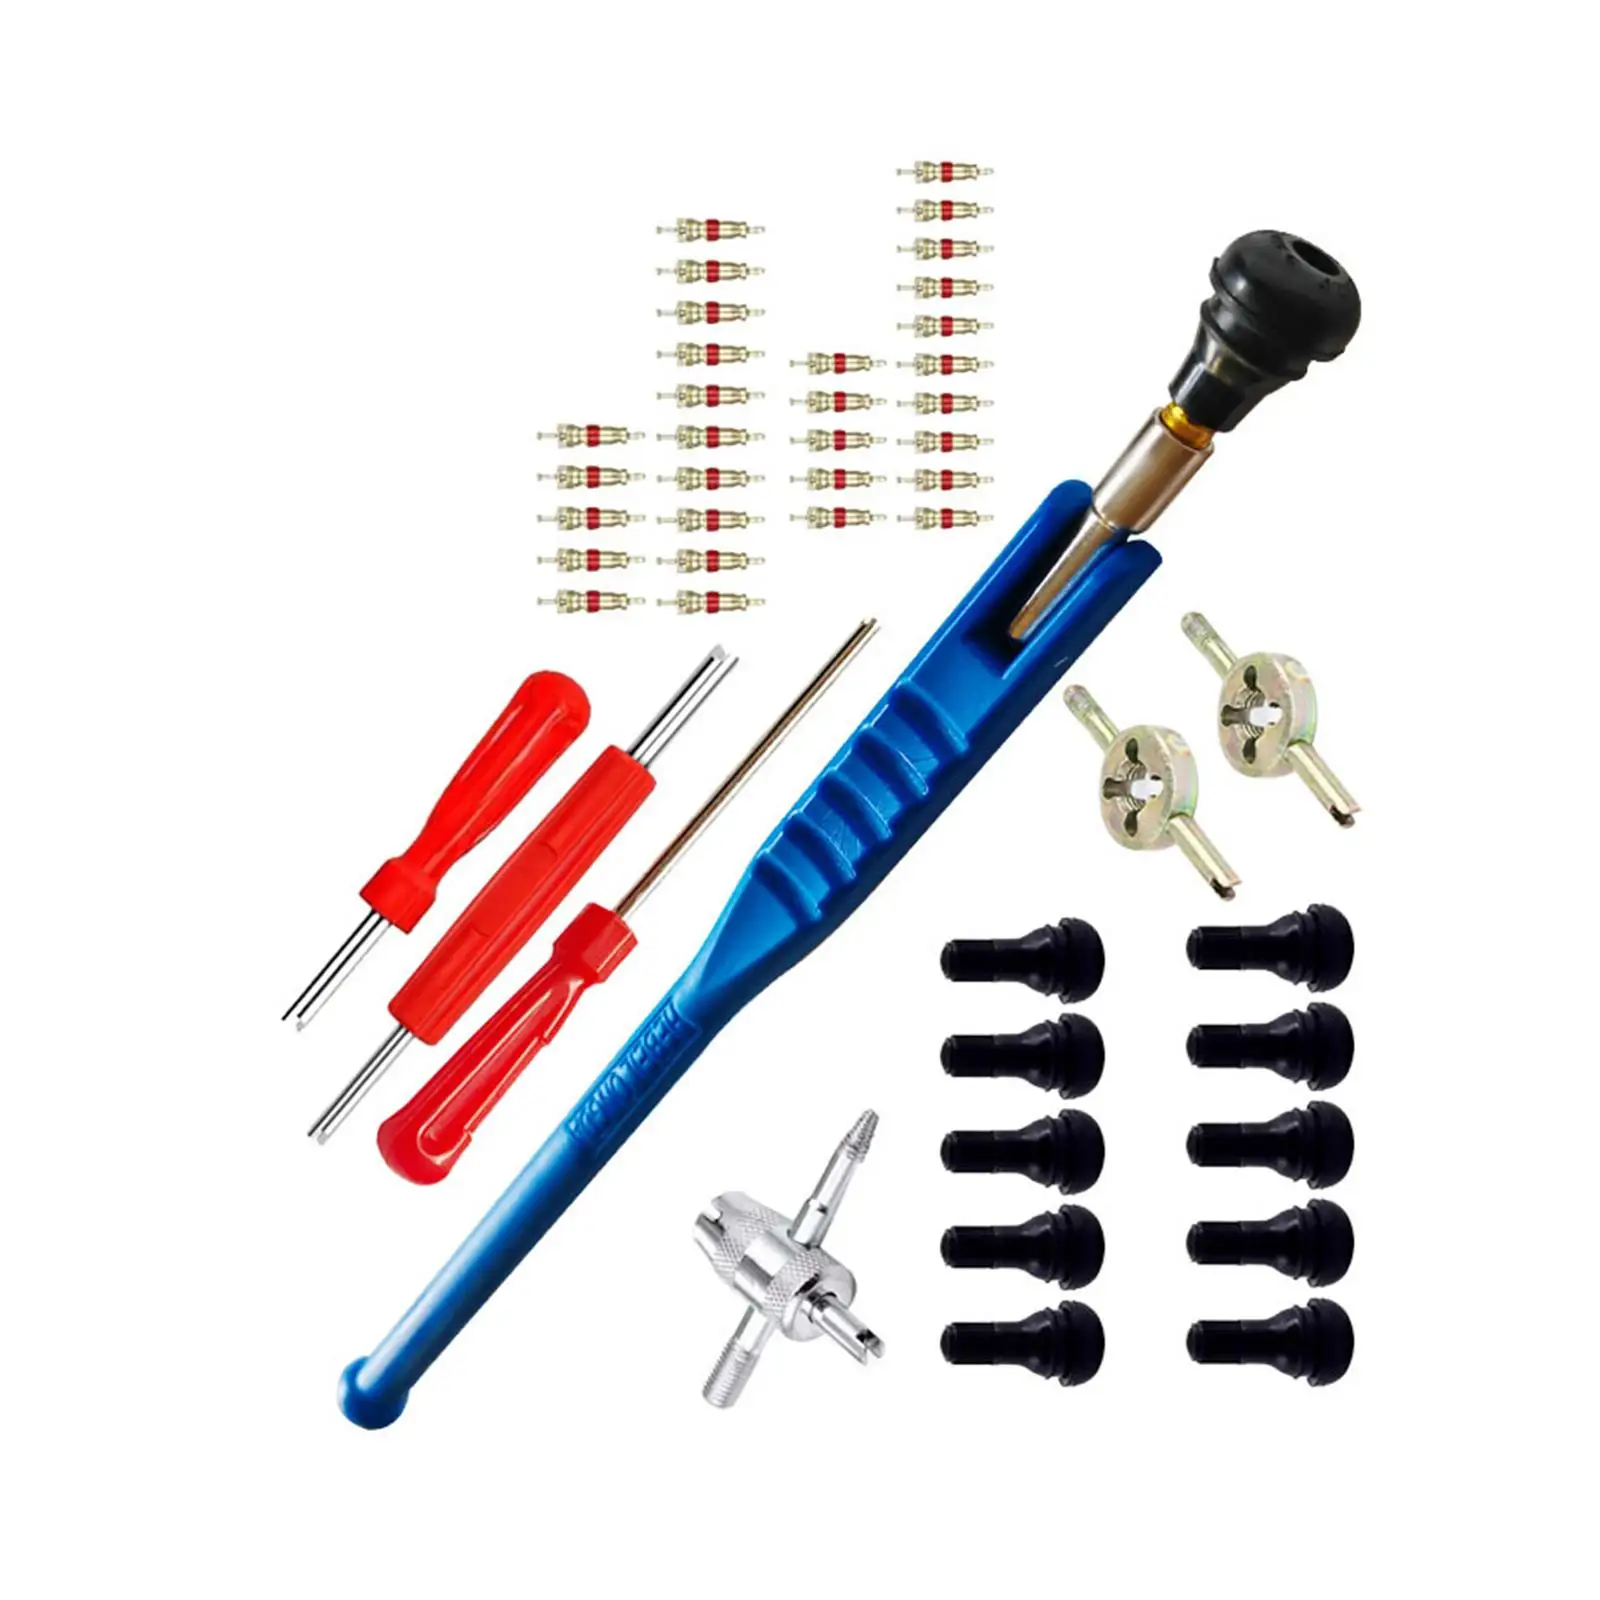 47x Tire Valve Stem Puller Tools Set Multifunctional for Motorcycle Car